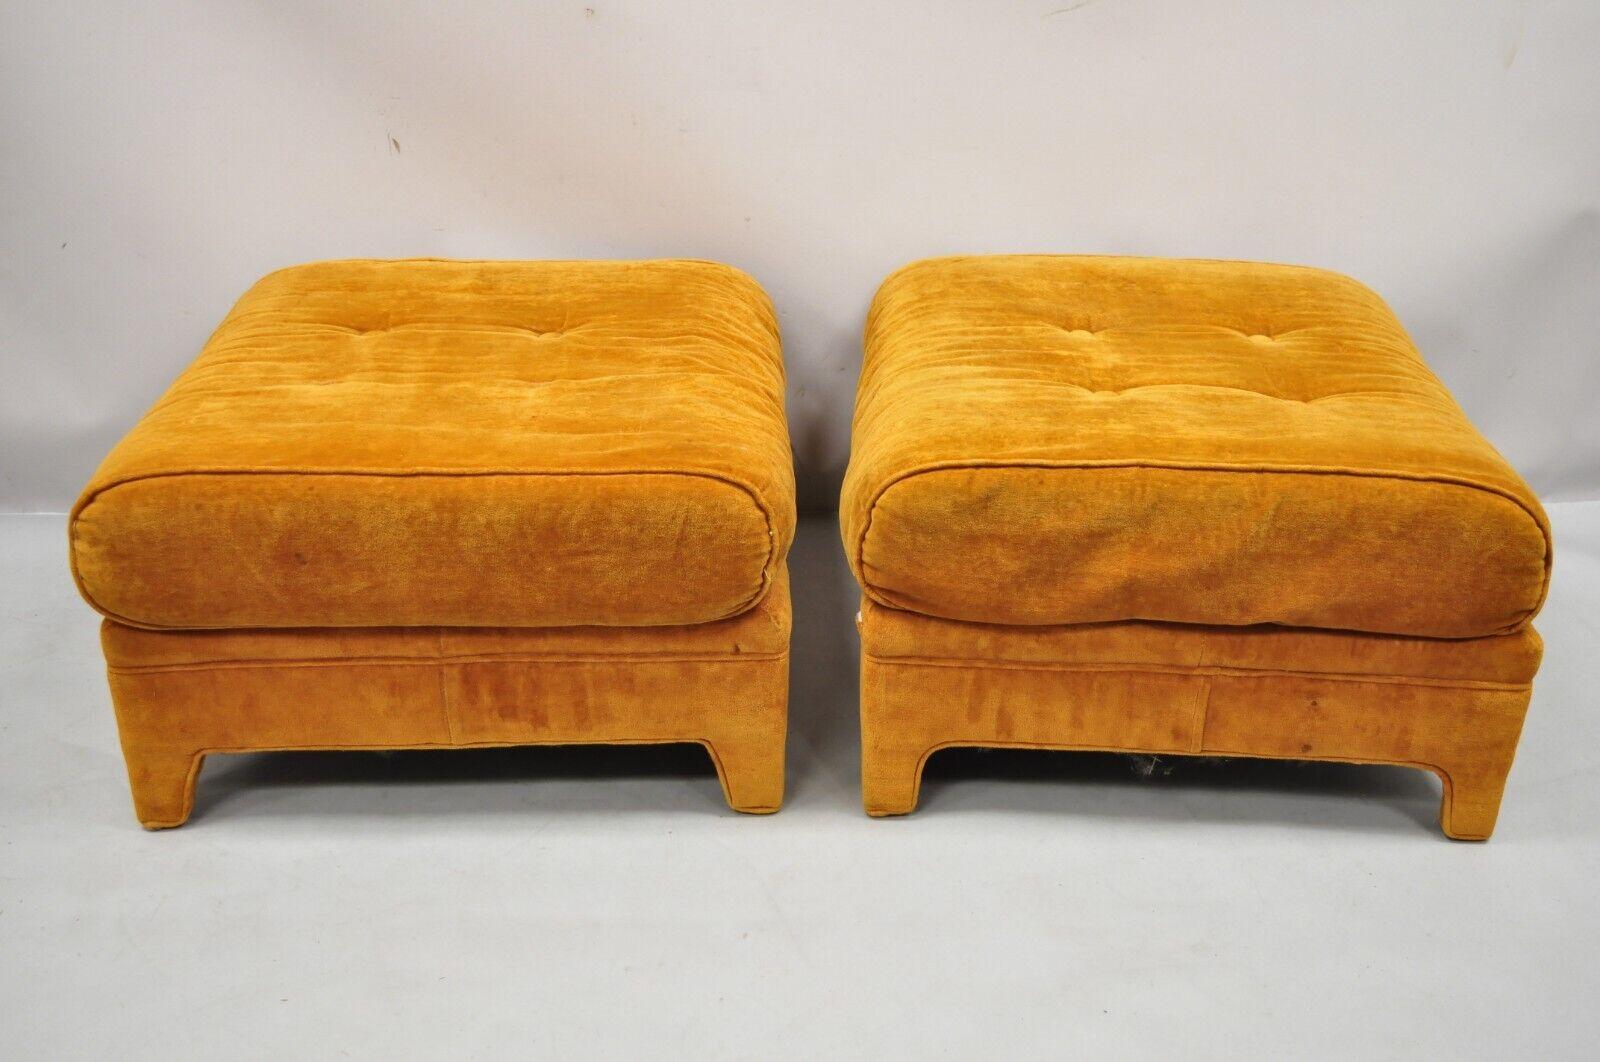 American Mid-Century Modern Orange Oversized Upholstered Ottomans by Pembrook, a Pair